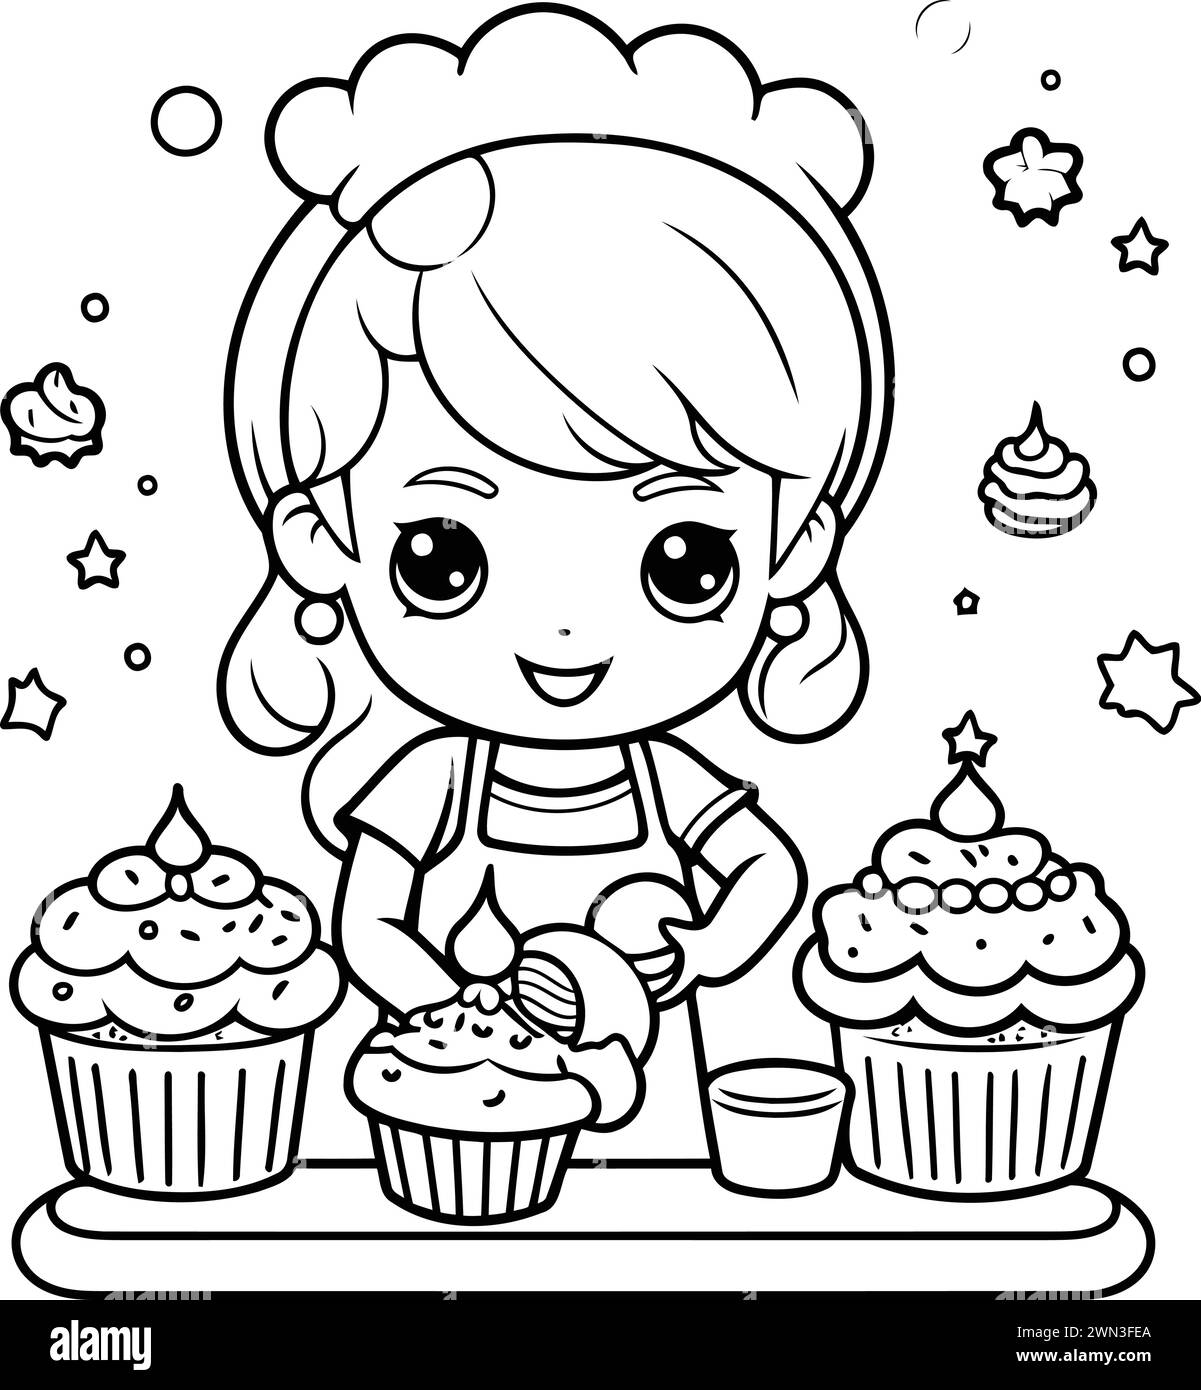 Coloring Page Outline Of cartoon girl baking cupcakes. Vector illustration. Stock Vector